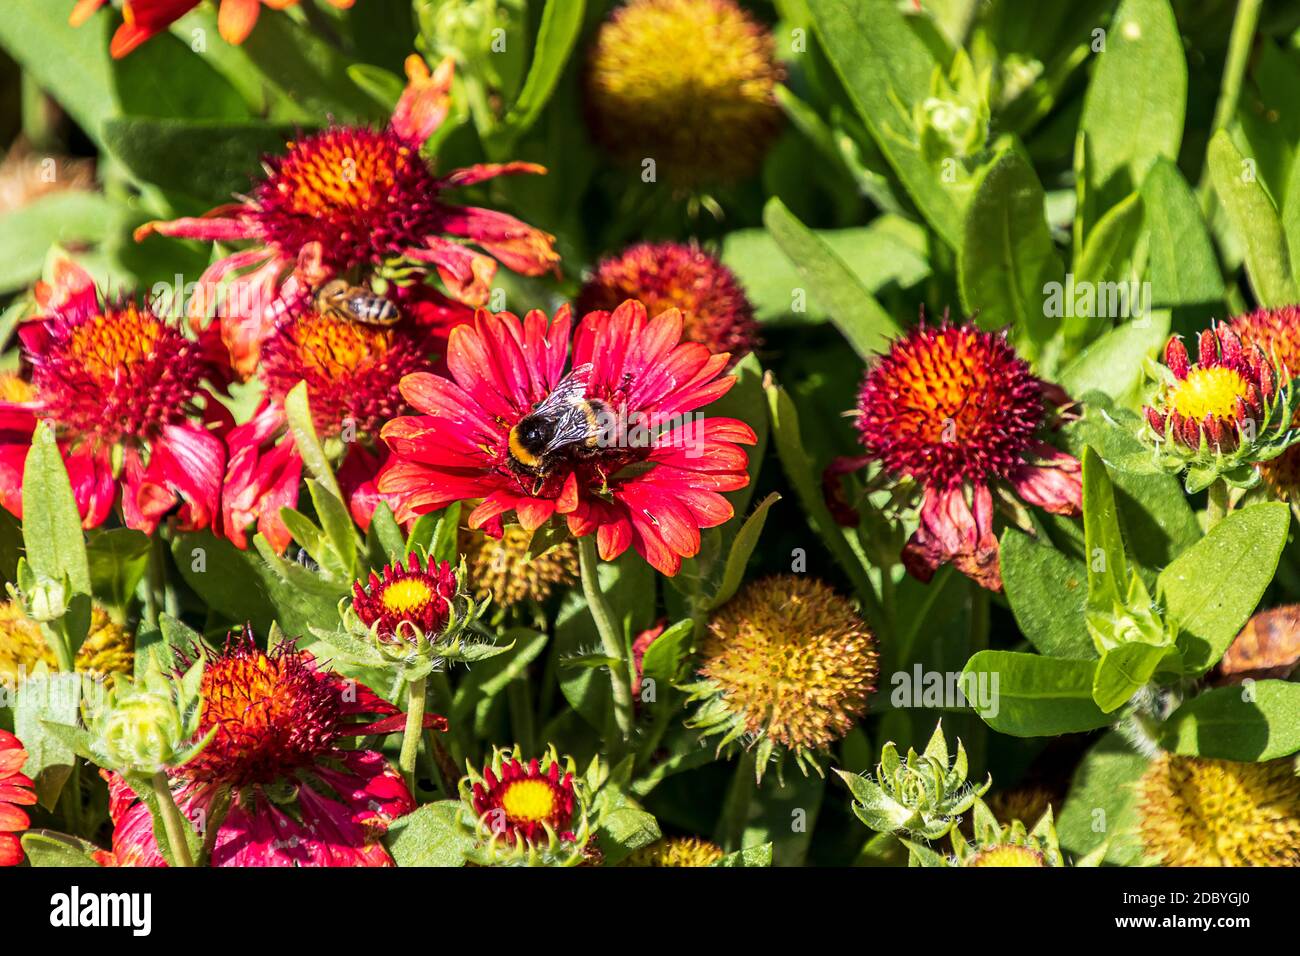 Red and yellow flowering Echinacea plant with a bee Stock Photo